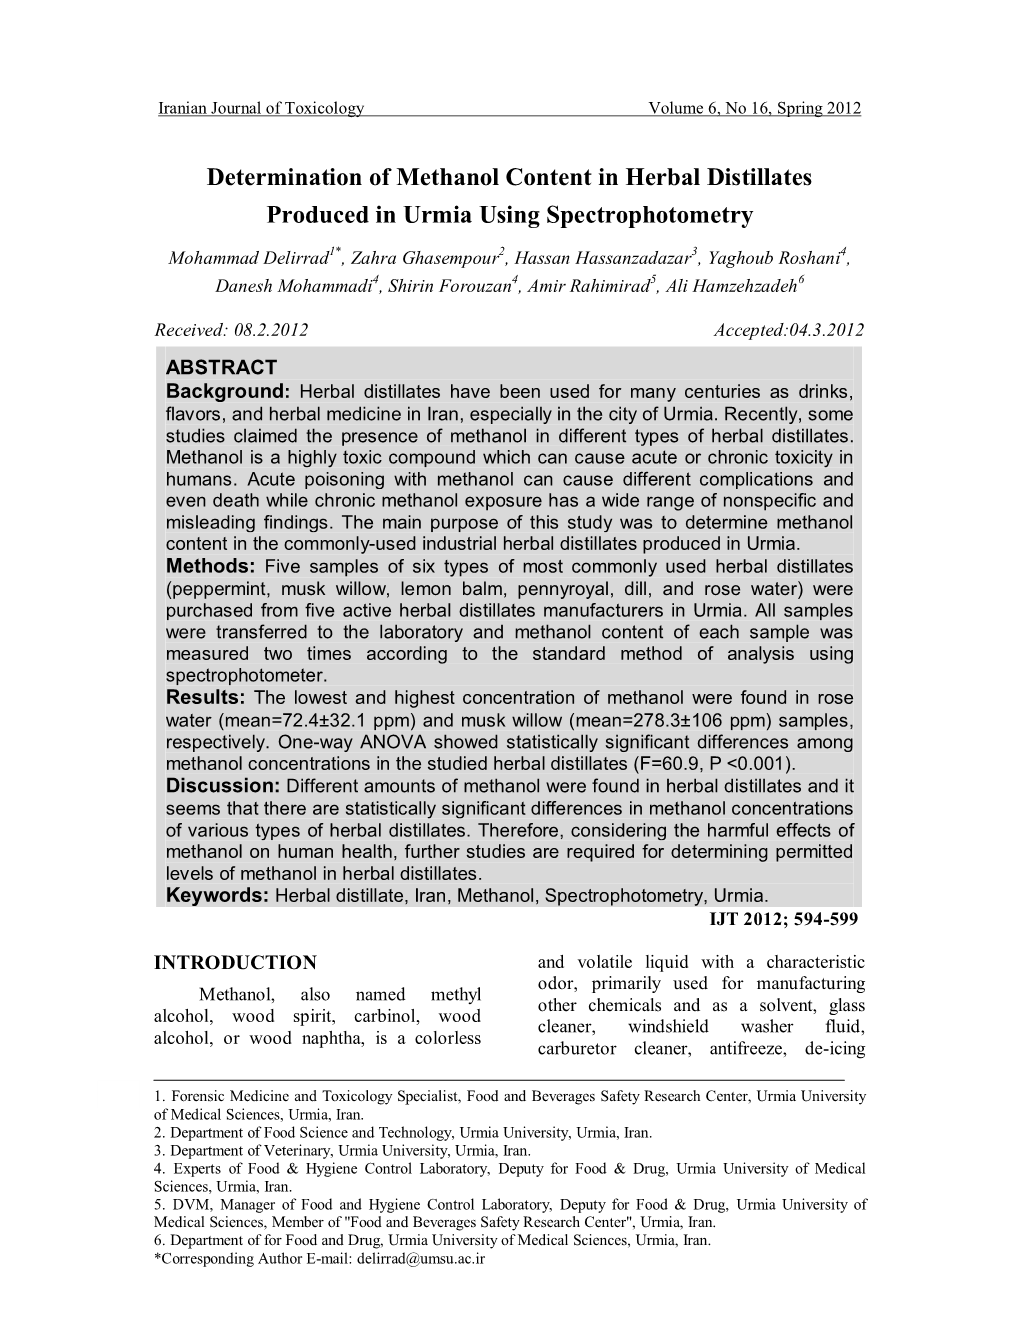 Determination of Methanol Content in Herbal Distillates Produced in Urmia Using Spectrophotometry